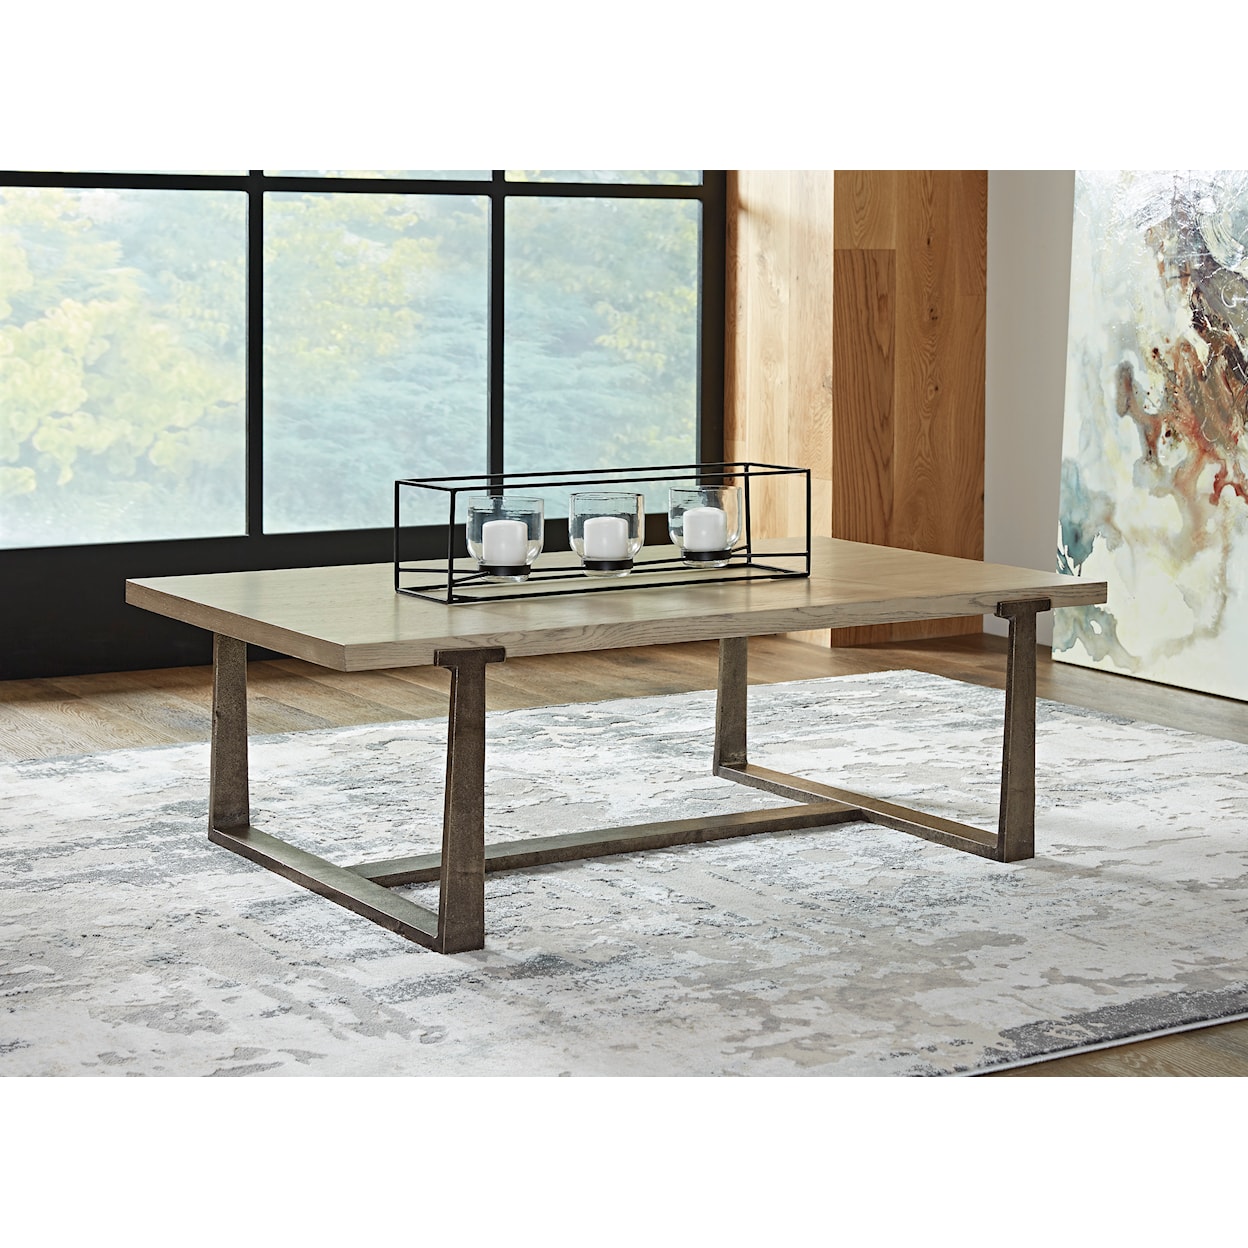 Signature Design by Ashley Furniture Dalenville Coffee Table